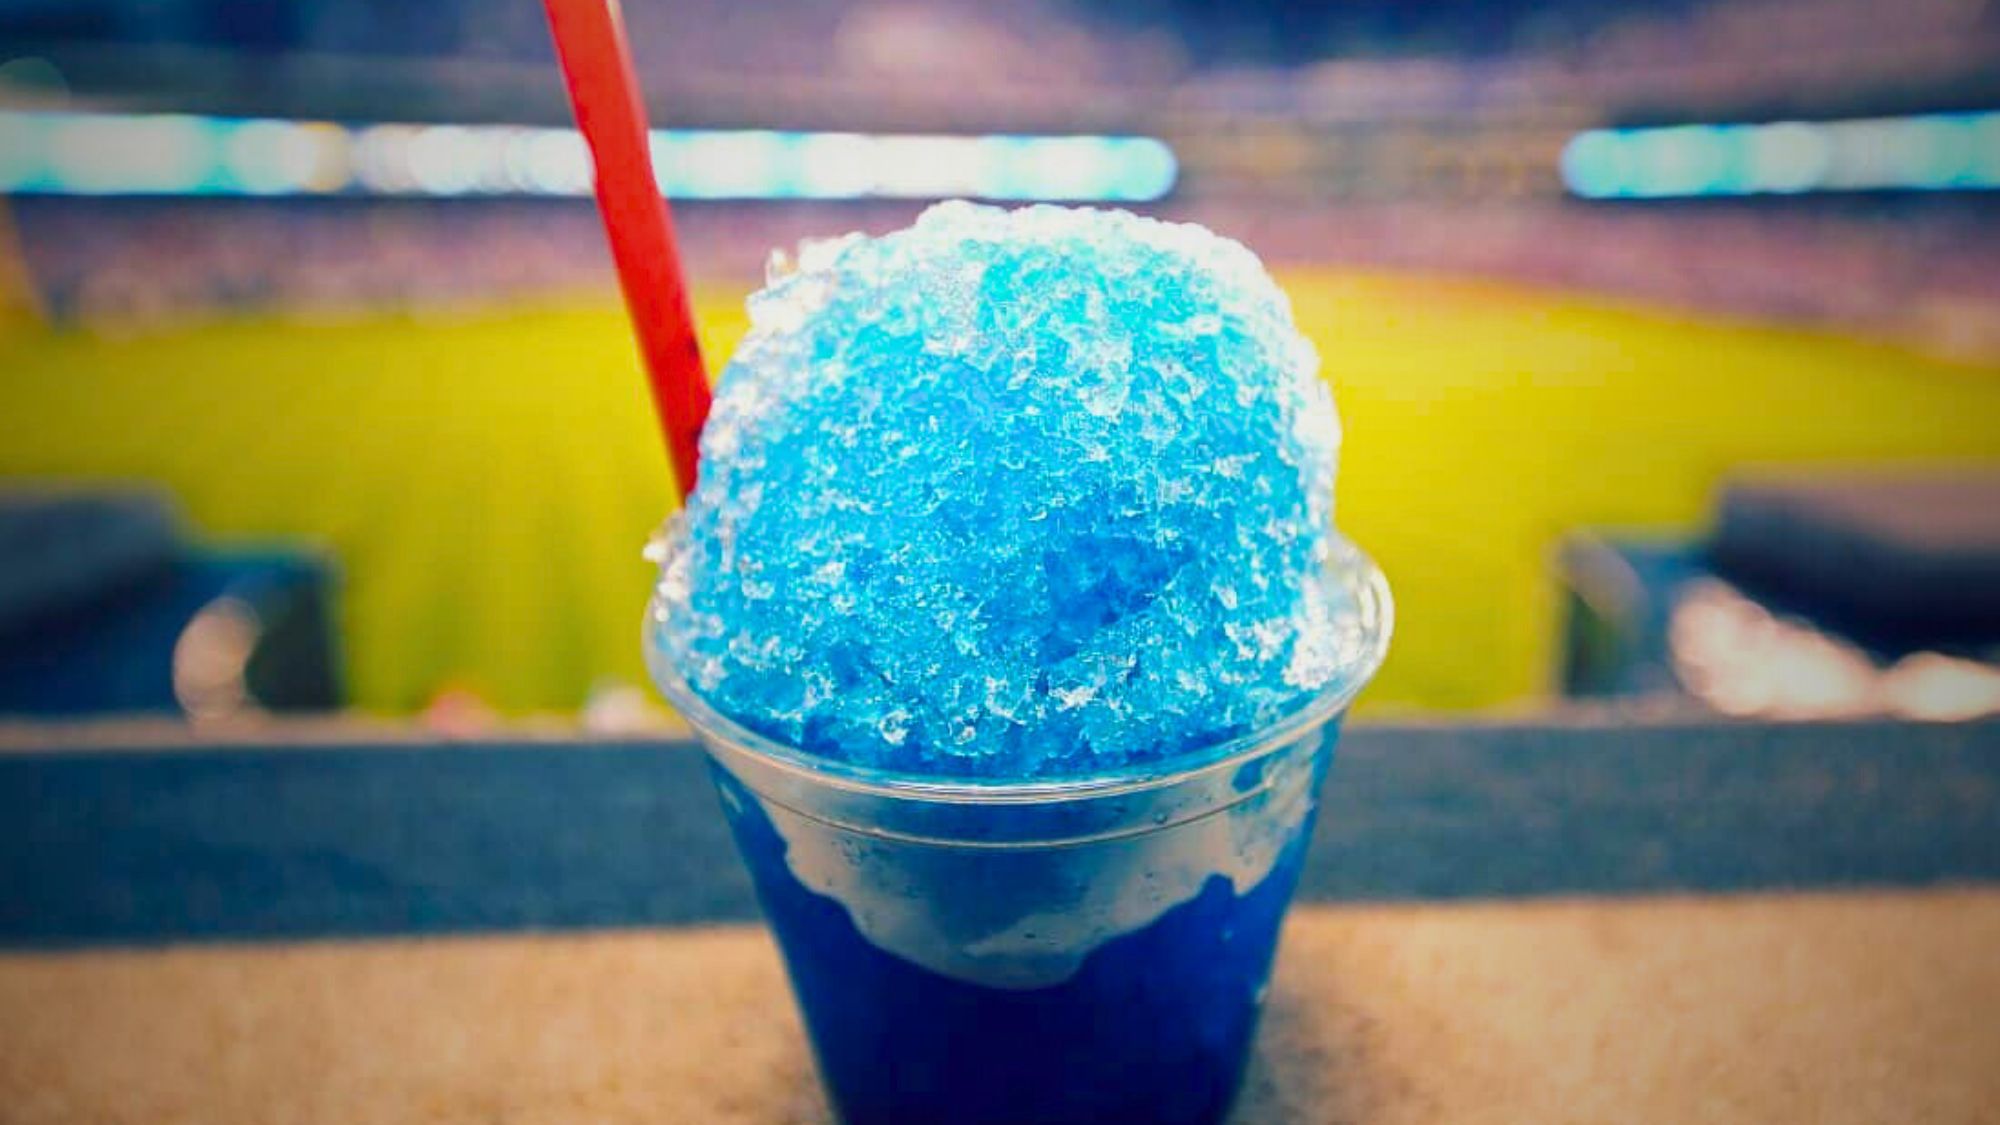 A refreshing blue ice cream drink, tangy tango ice blast, served in a cup at a baseball stadium